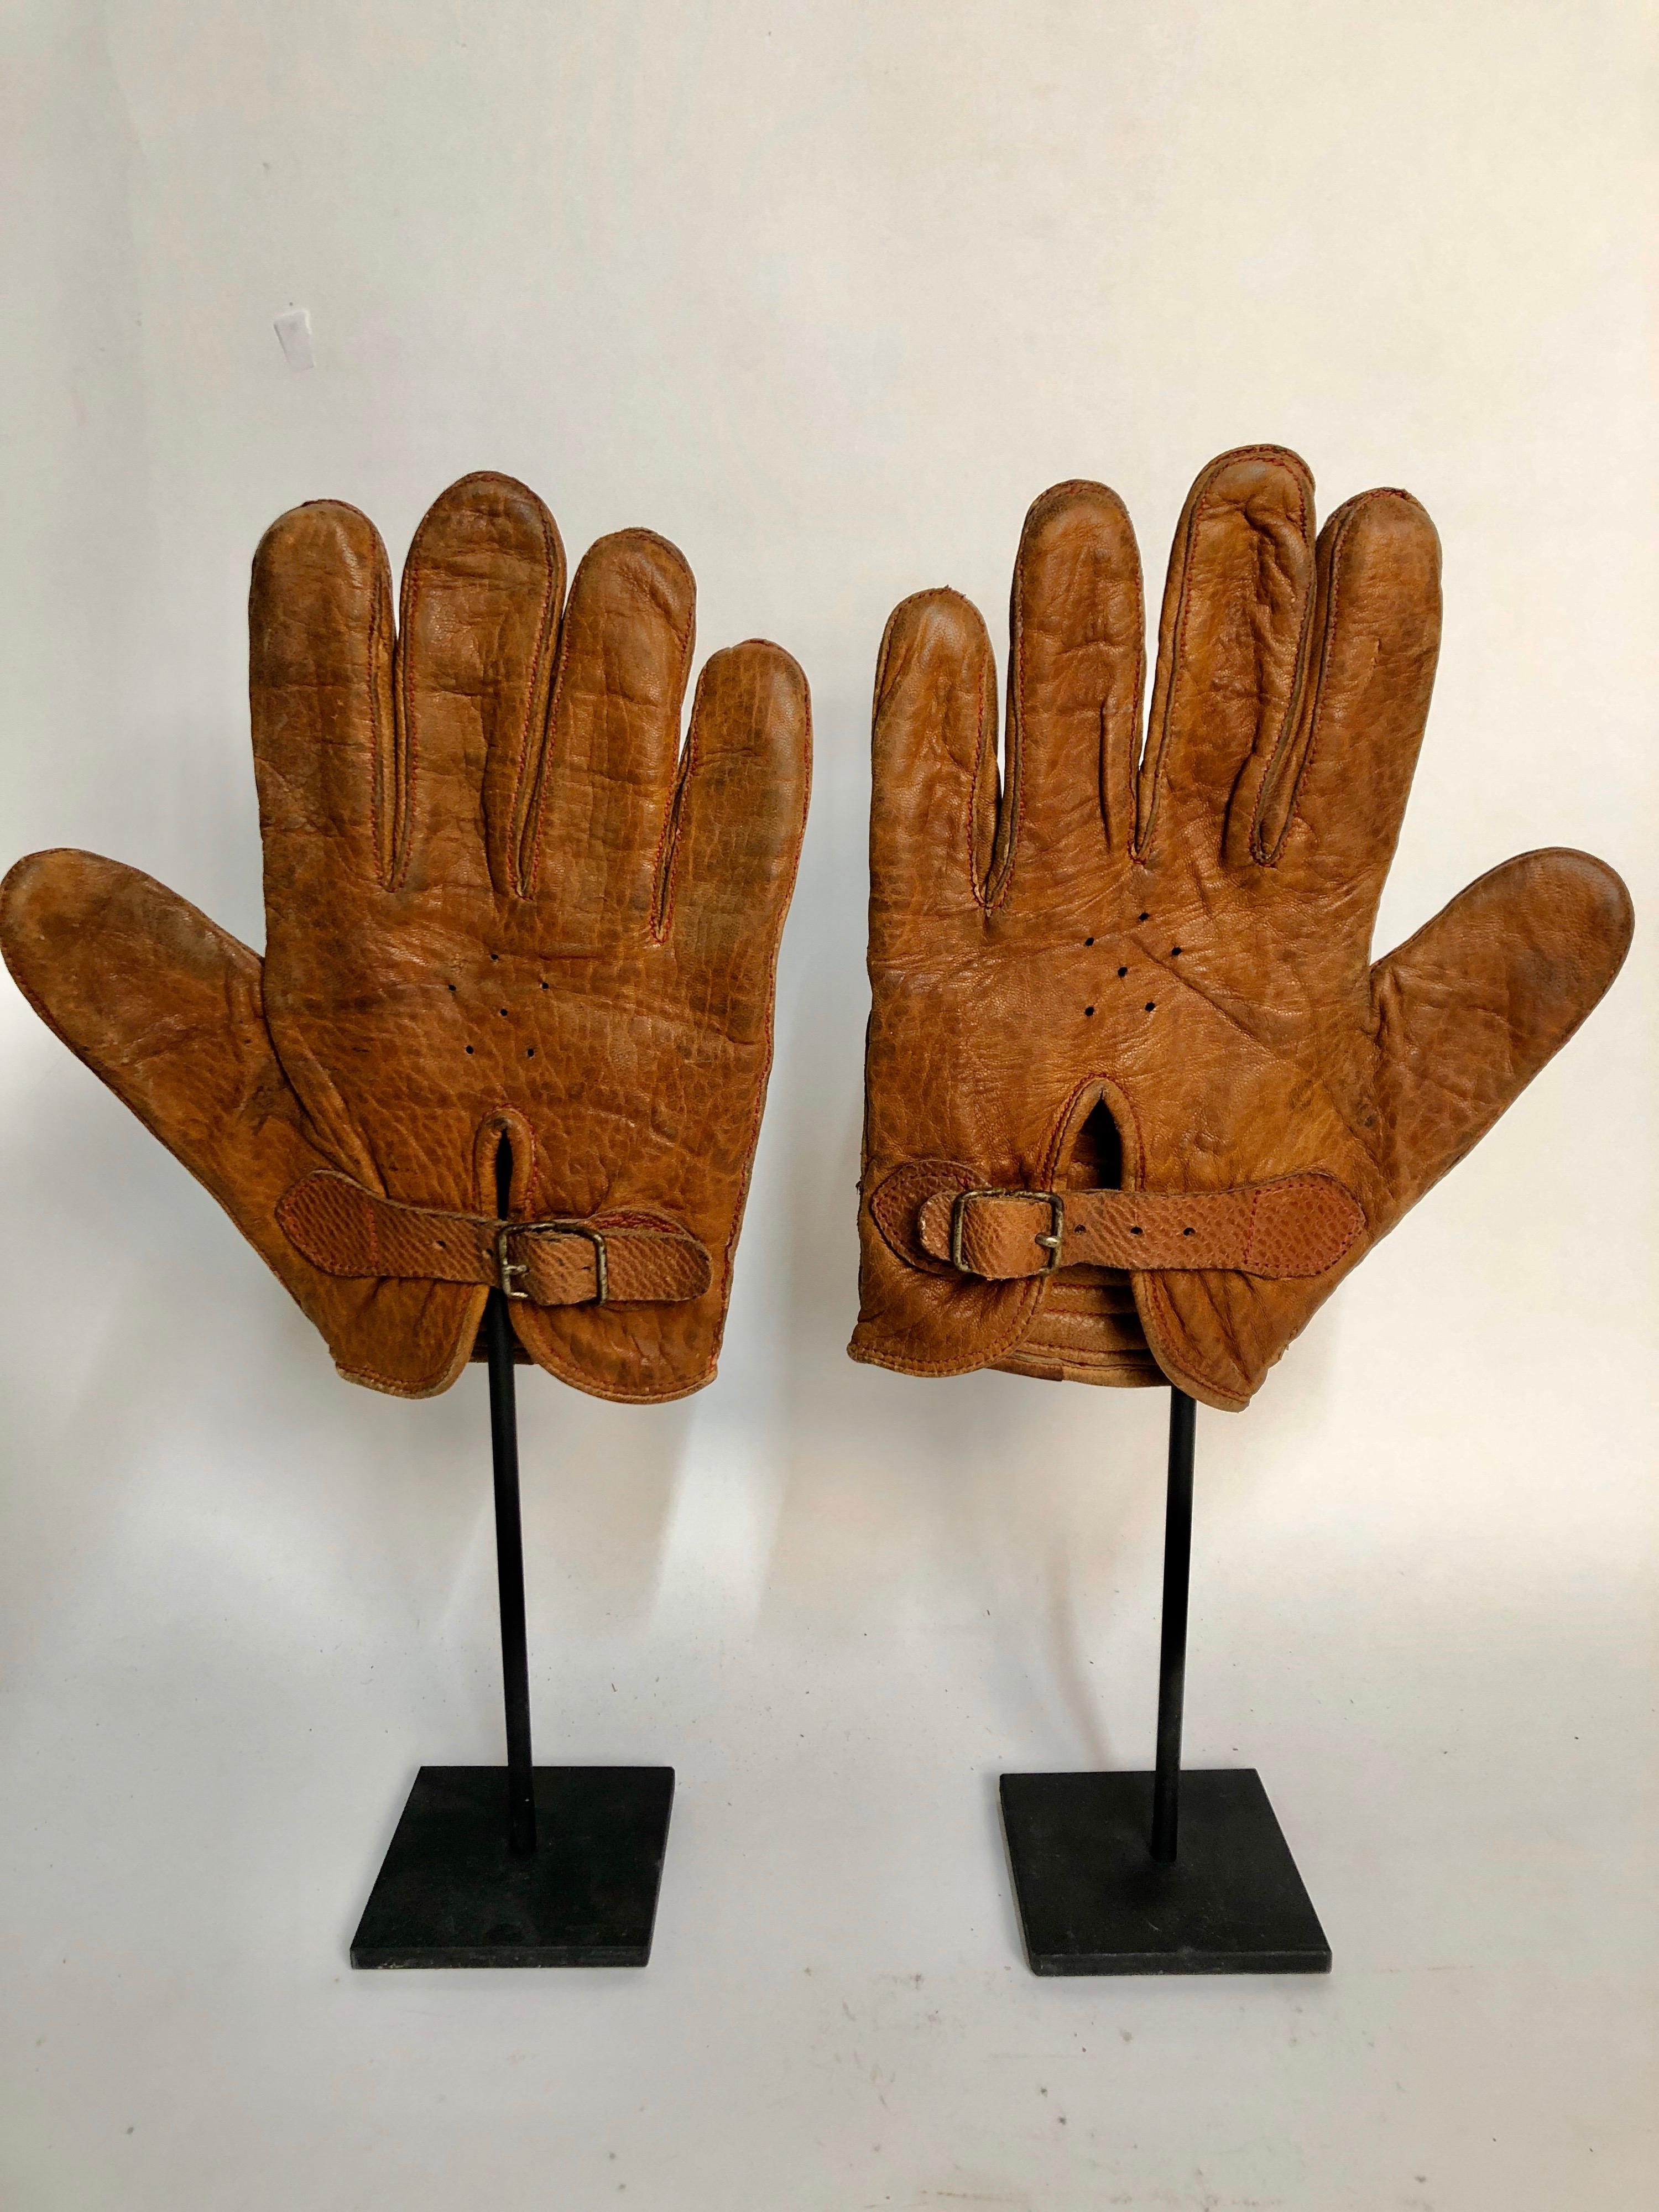 A pair of early American leather handball gloves with great optical patterns. Mounted on custom made steel stands. Measure: 14.5 x 7 x 3. Probably made by Spaulding.